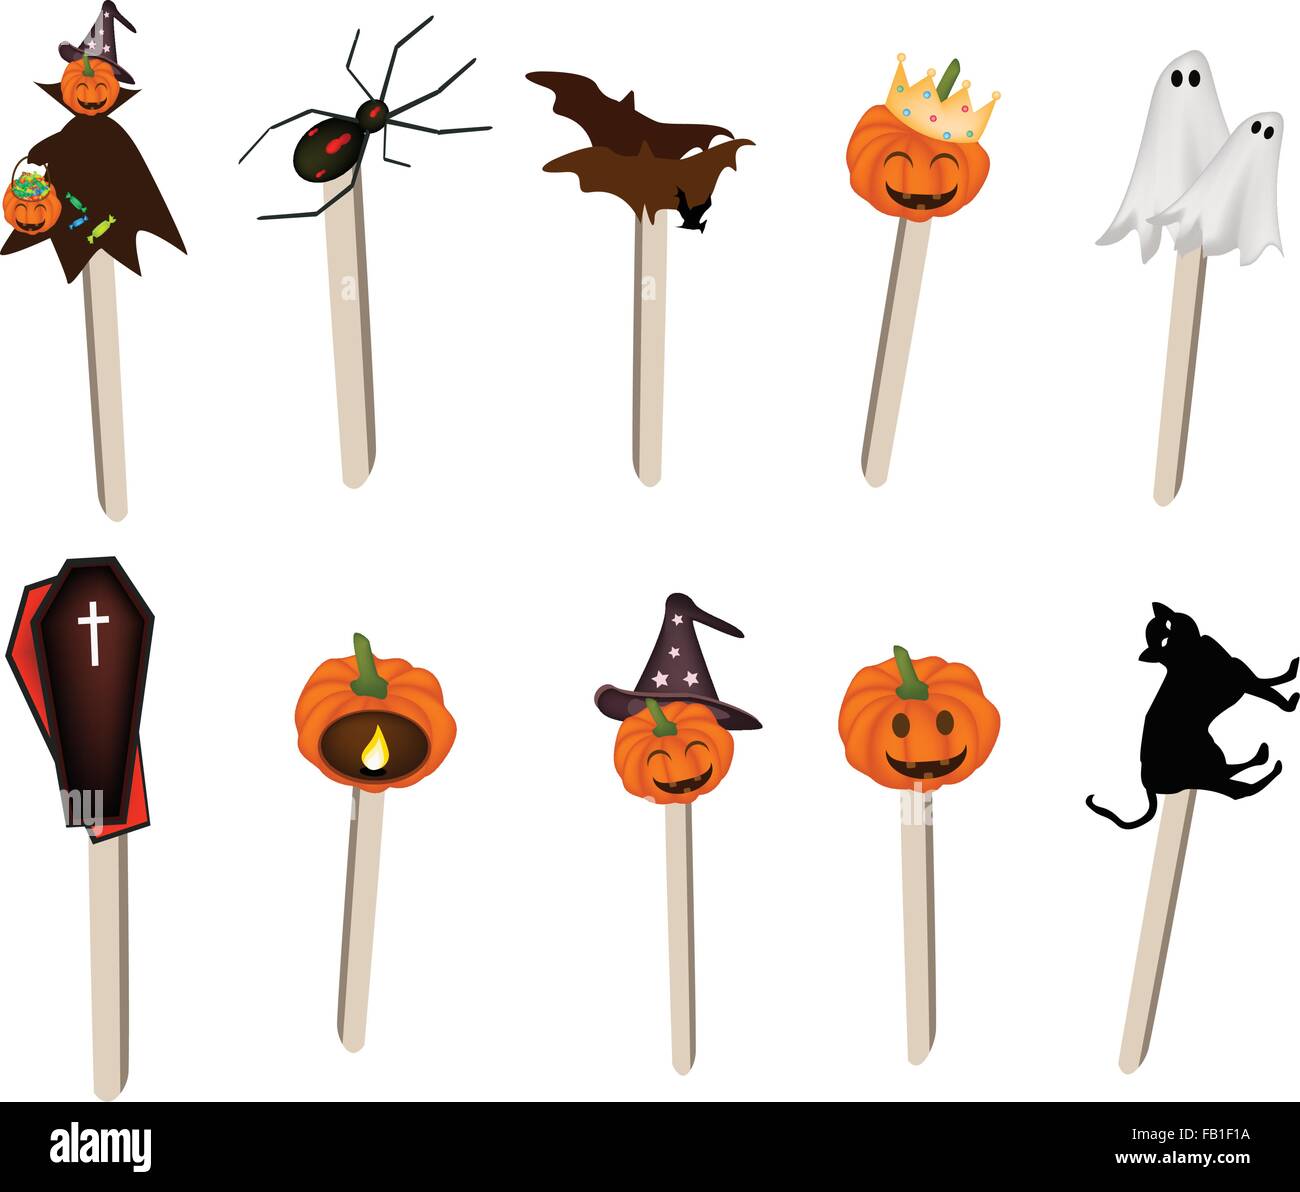 Illustration Collection of Halloween Evils and Halloween Items on Wooden Sticks for Halloween Celebration. Stock Vector